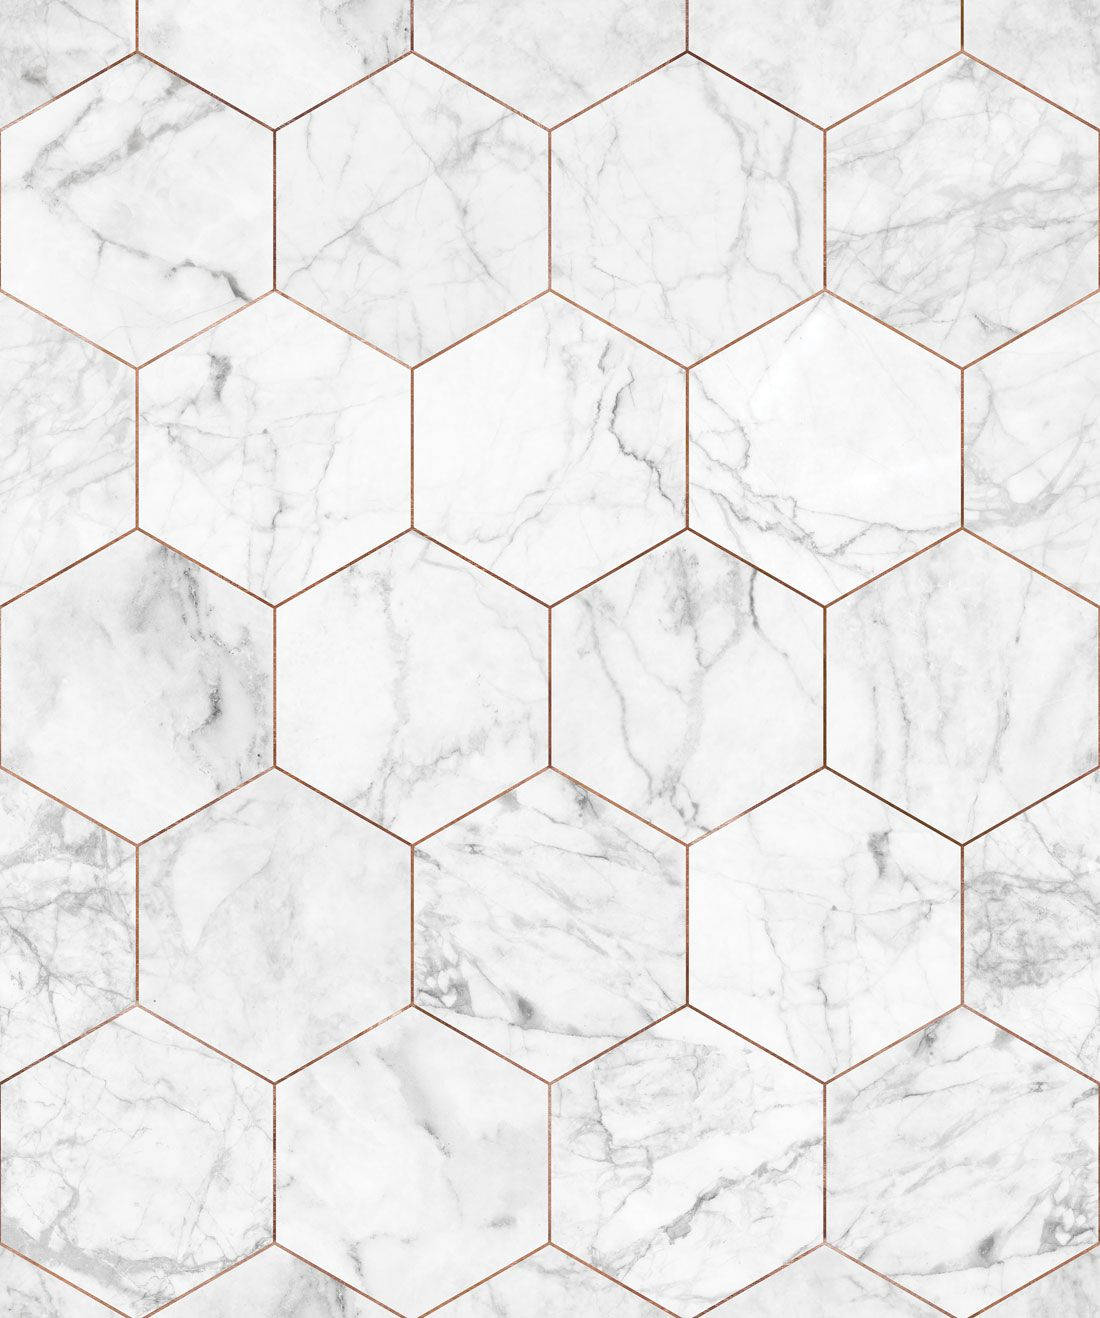 Hexagons On White Marble Background